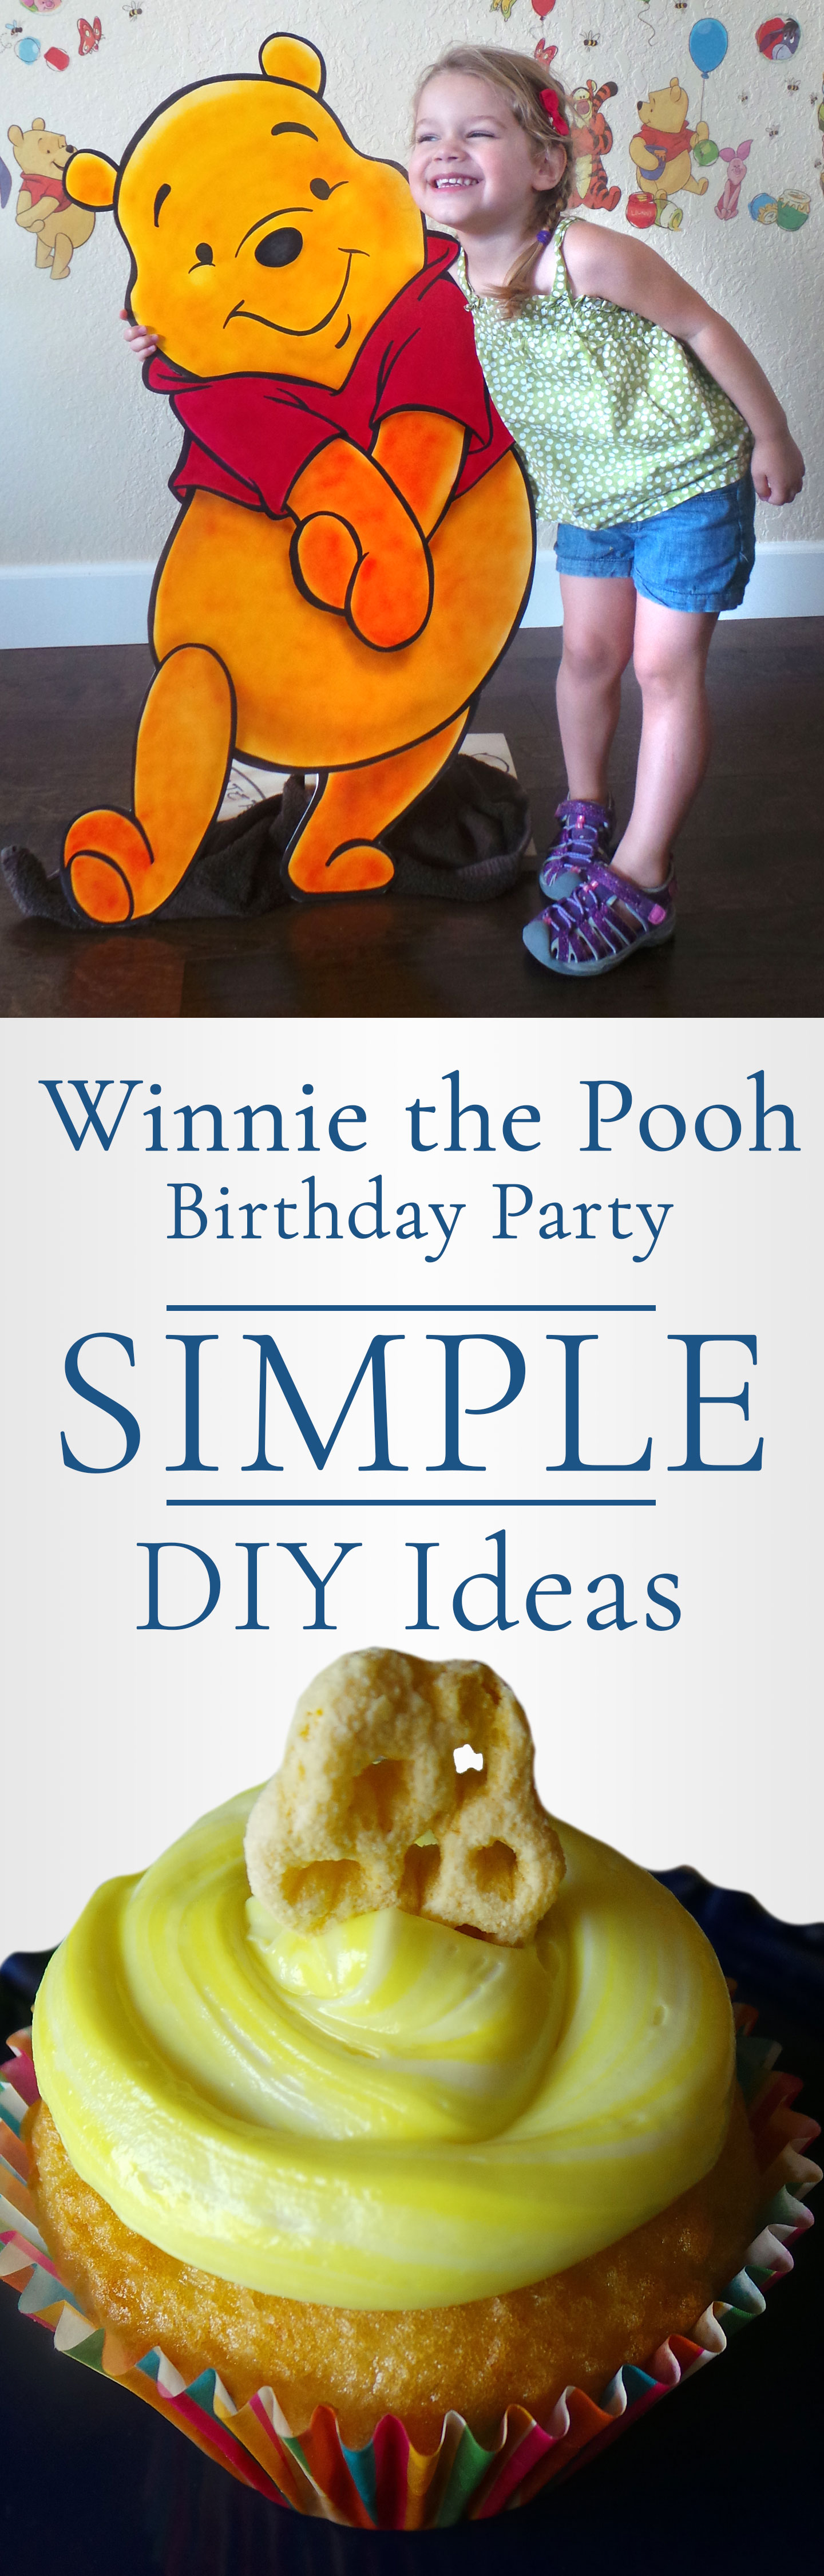 winnie the pooh party